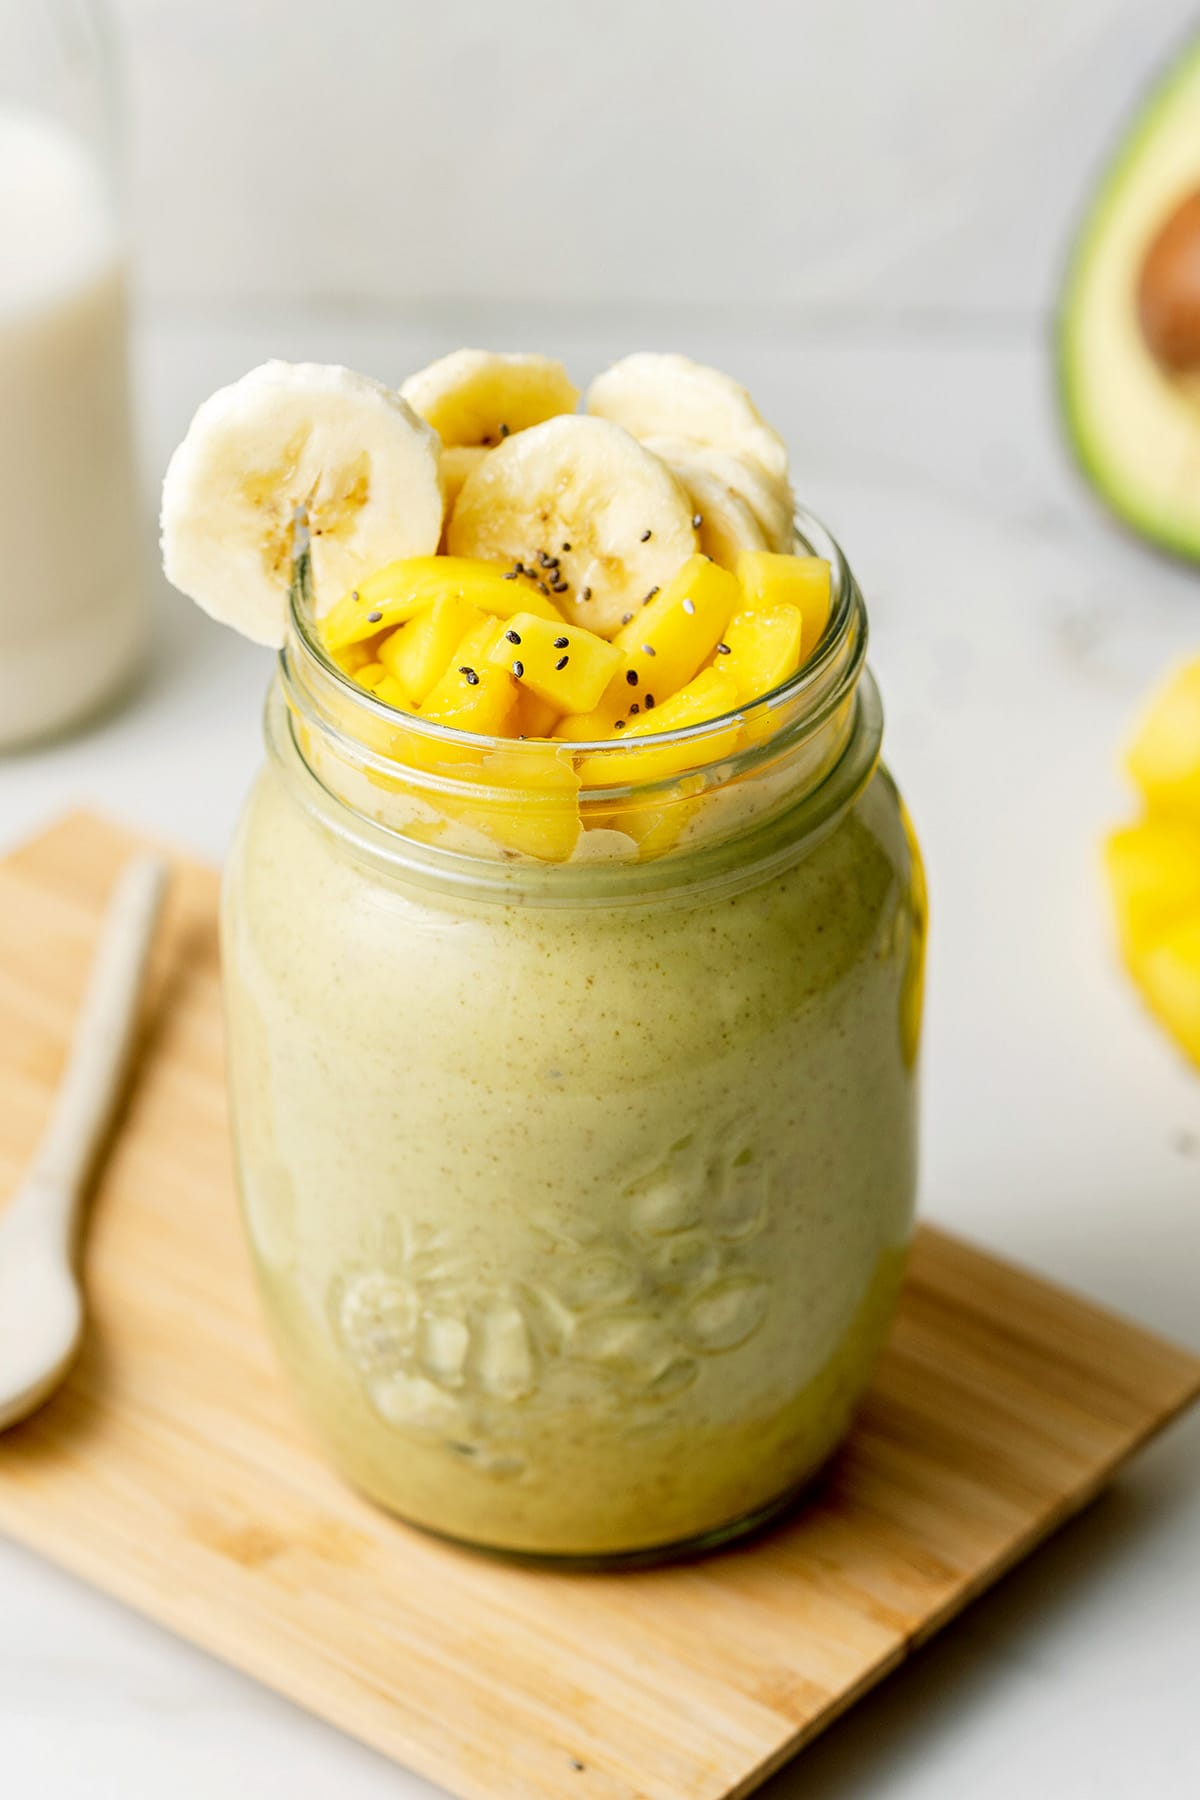 banana avocado smoothie in glass standing on wooden board. Smoothie topped with cut up fruit